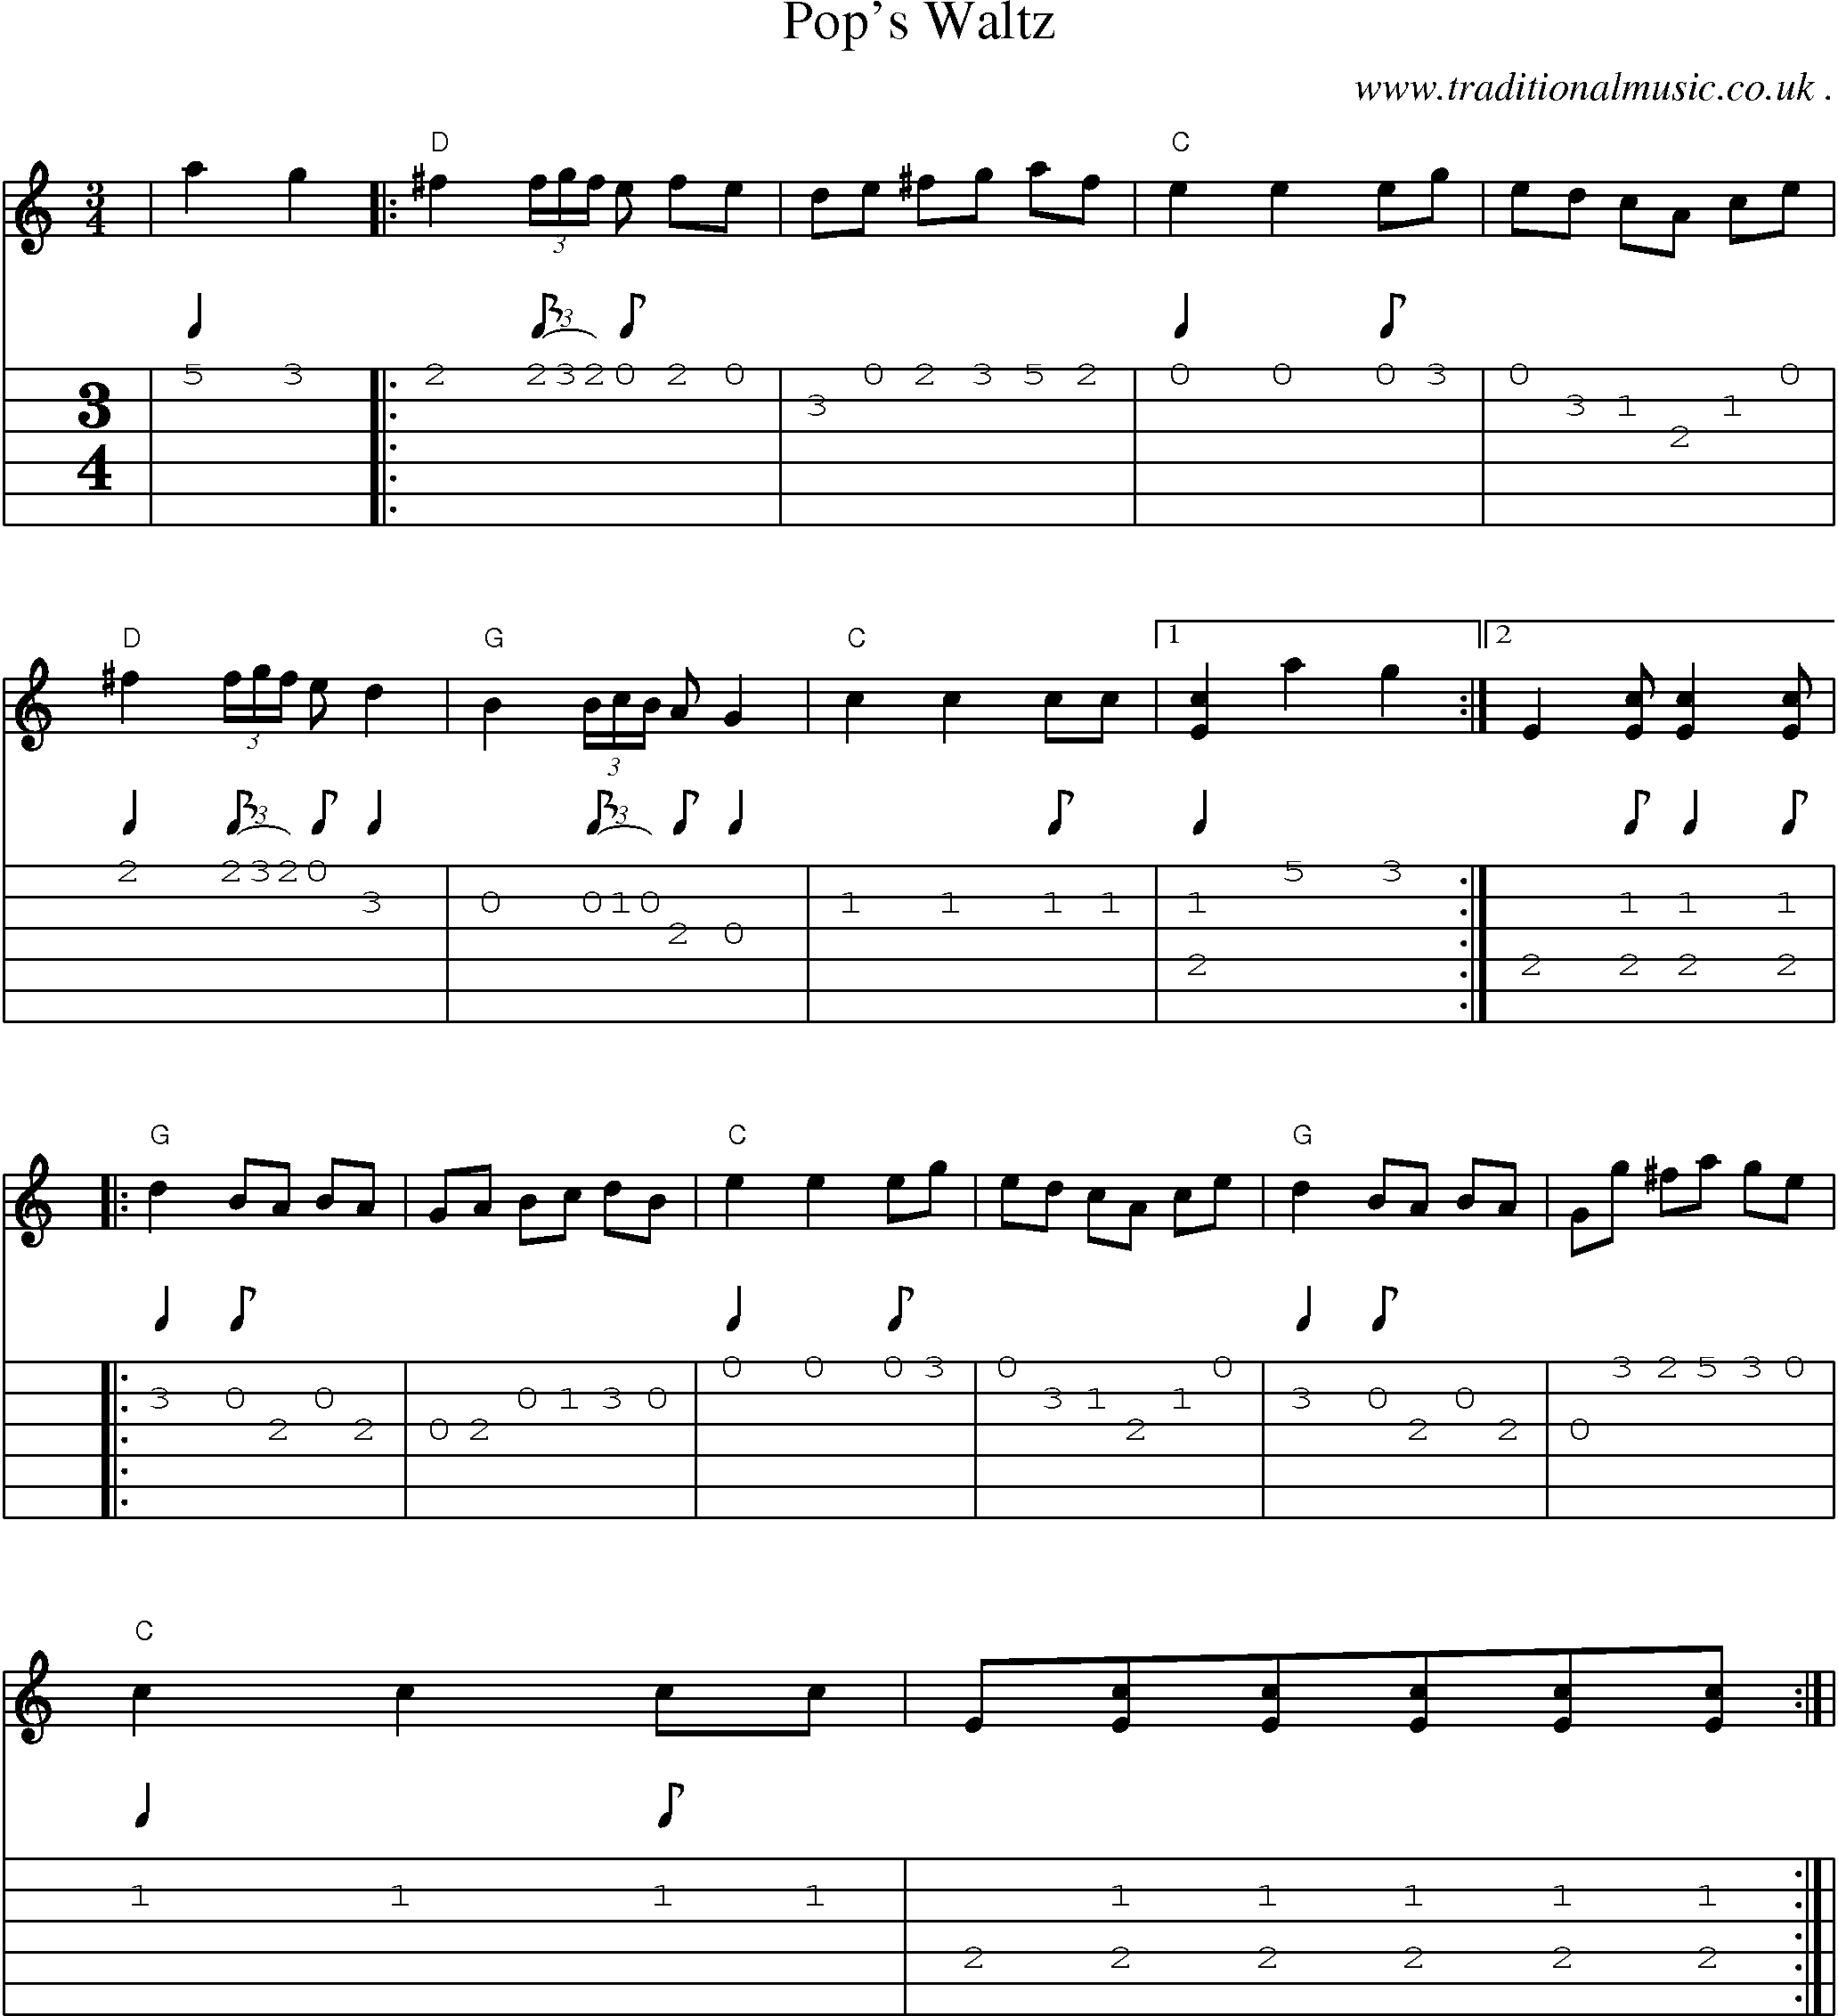 Music Score and Guitar Tabs for Pops Waltz